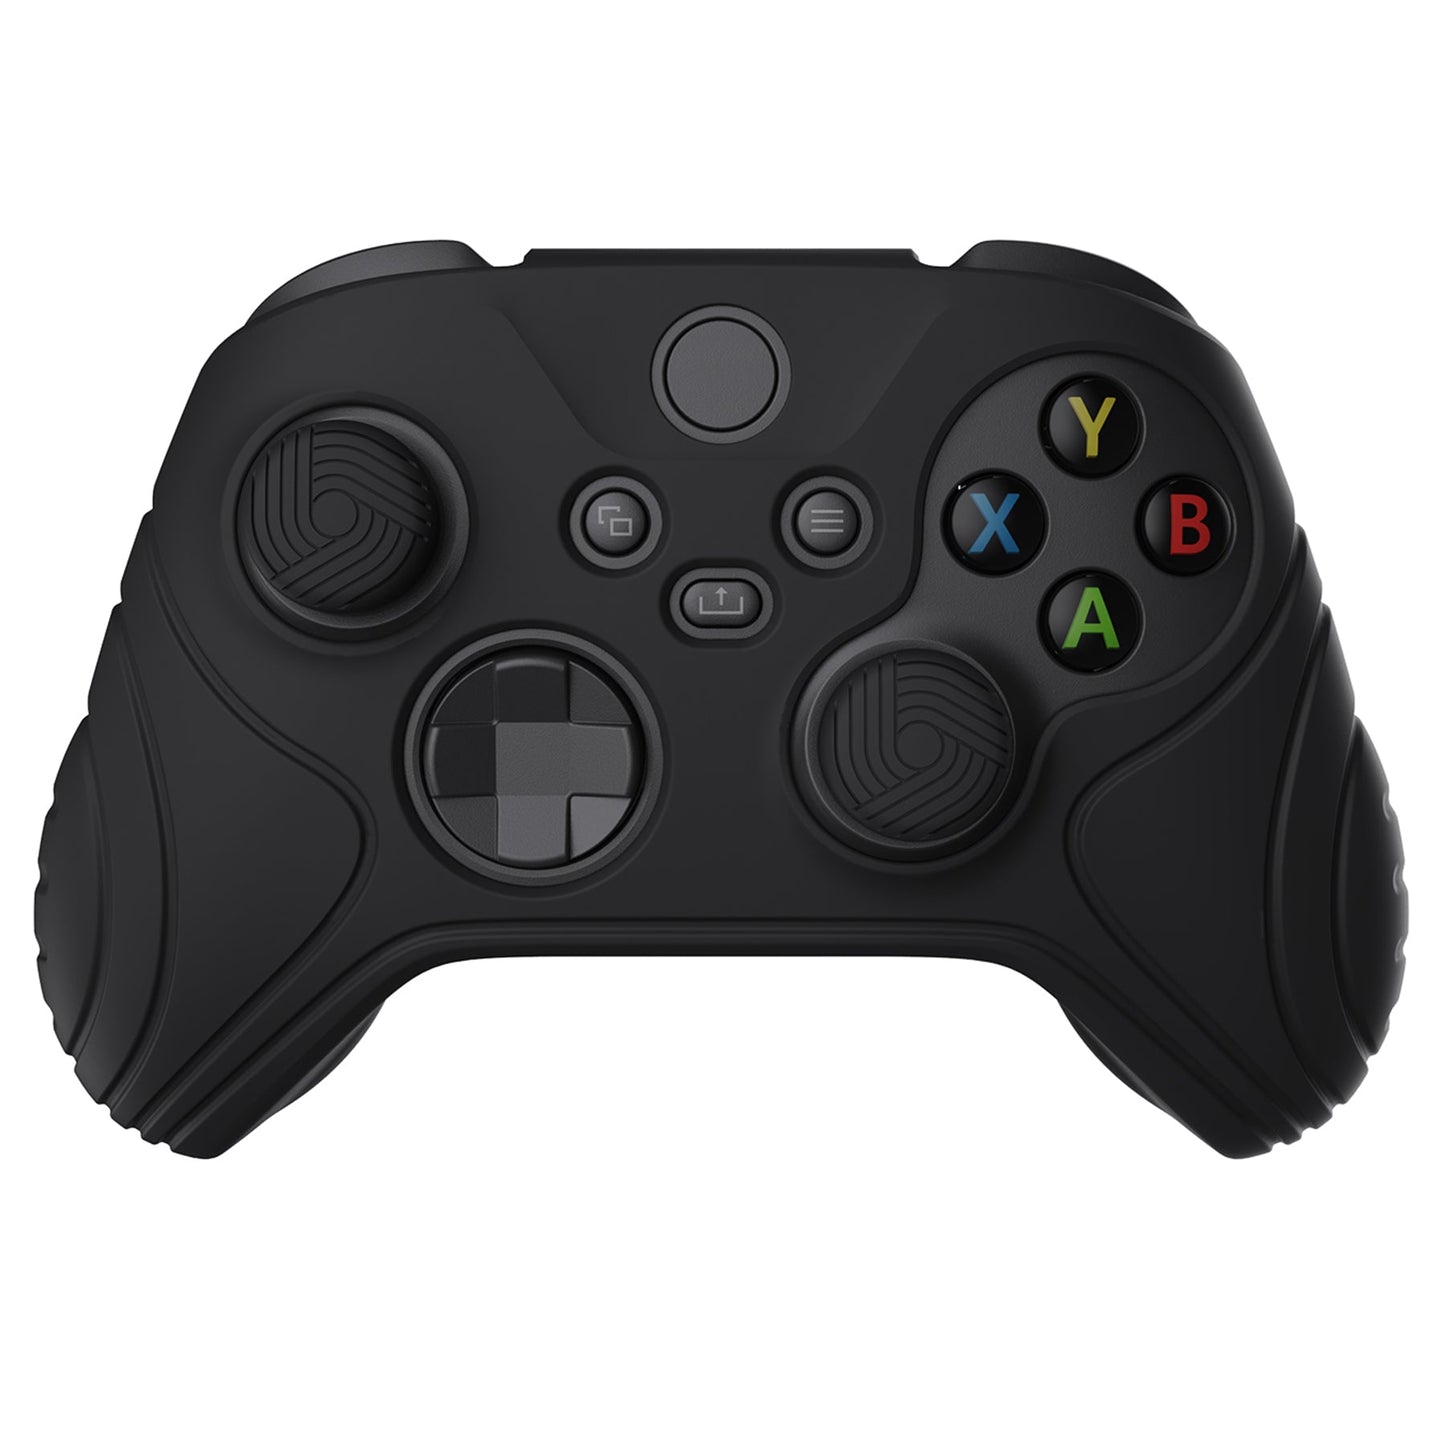 PlayVital Samurai Edition Black Anti-slip Controller Grip Silicone Skin, Ergonomic Soft Rubber Protective Case Cover for Xbox Series S/X Controller with Black Thumb Stick Caps - WAX3001 PlayVital